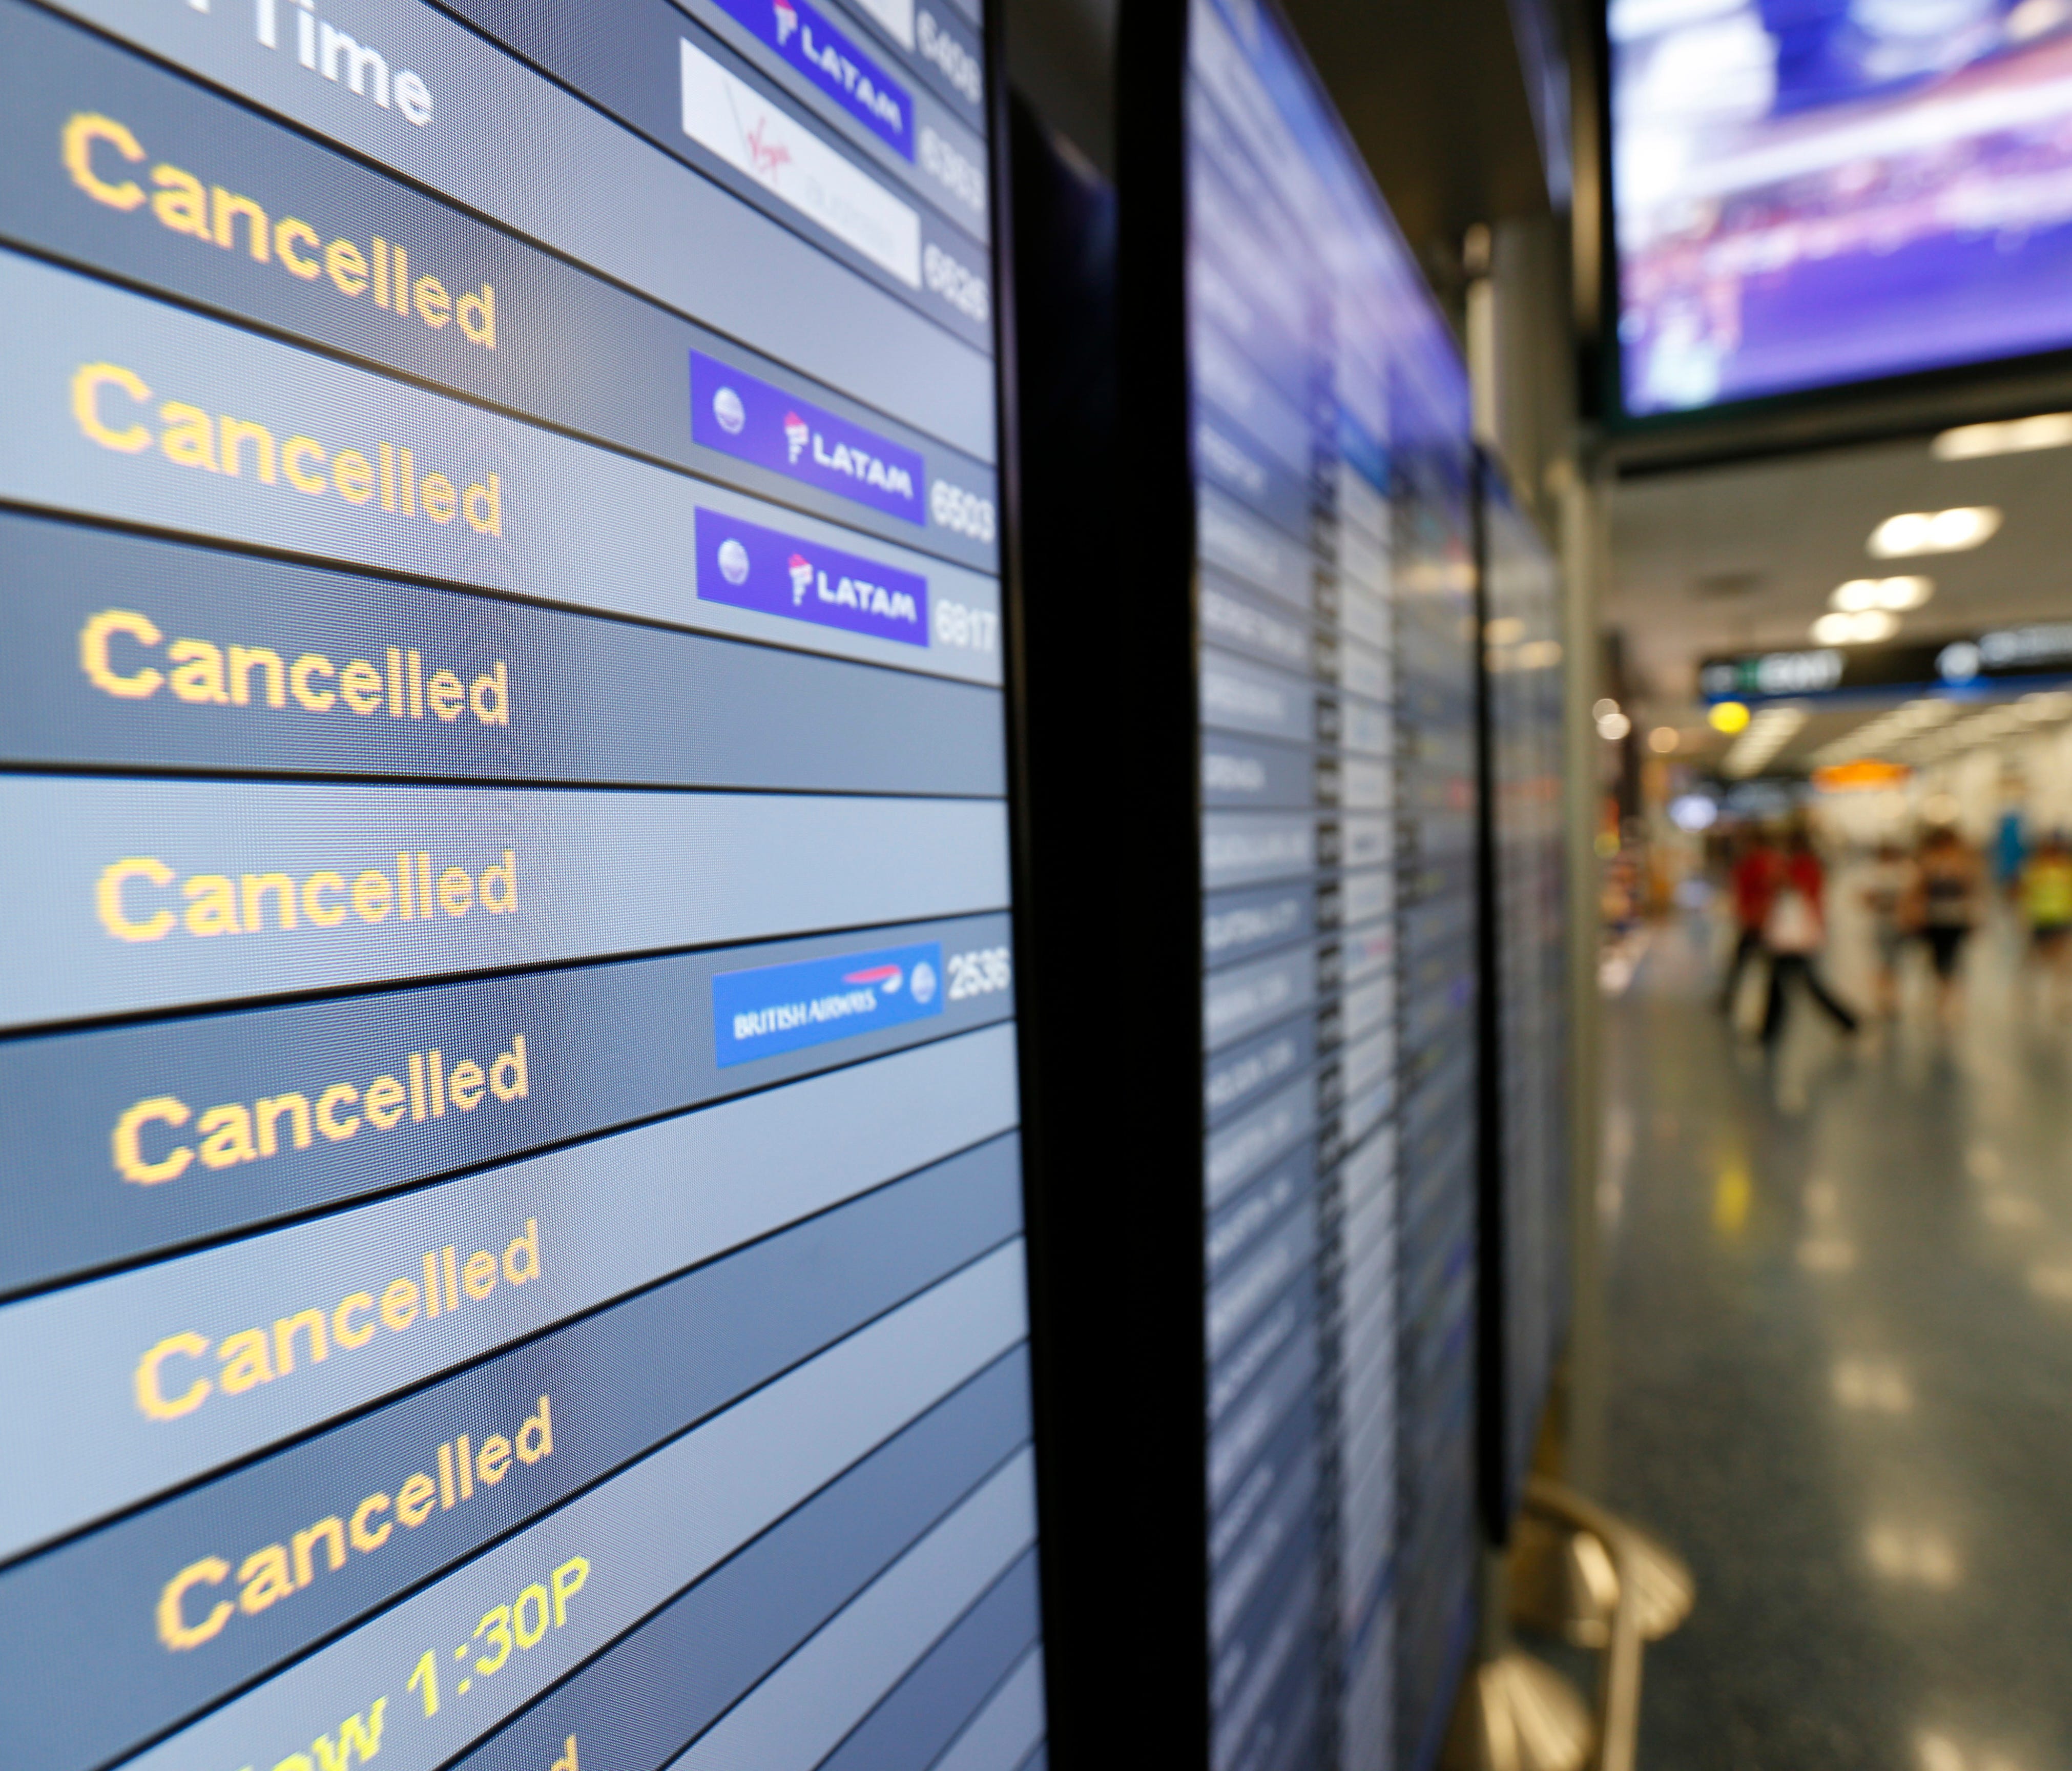 A monitor shows canceled flights at Miami International Airport on Friday, Sept. 8, 2017.